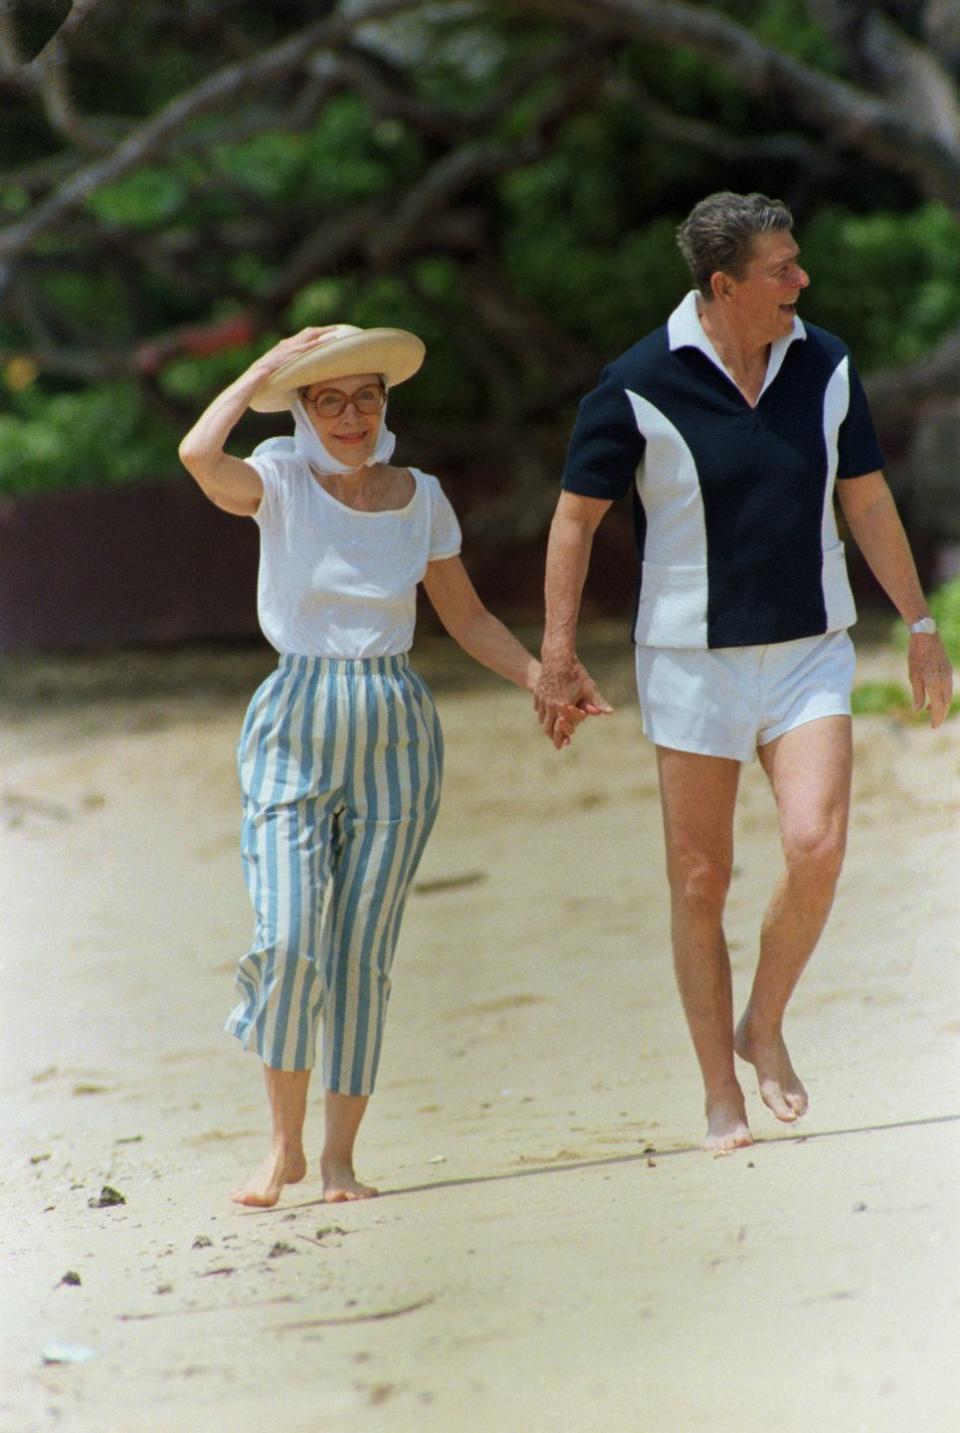 41 Photos of U.S. Presidents Cutting Loose on Vacation